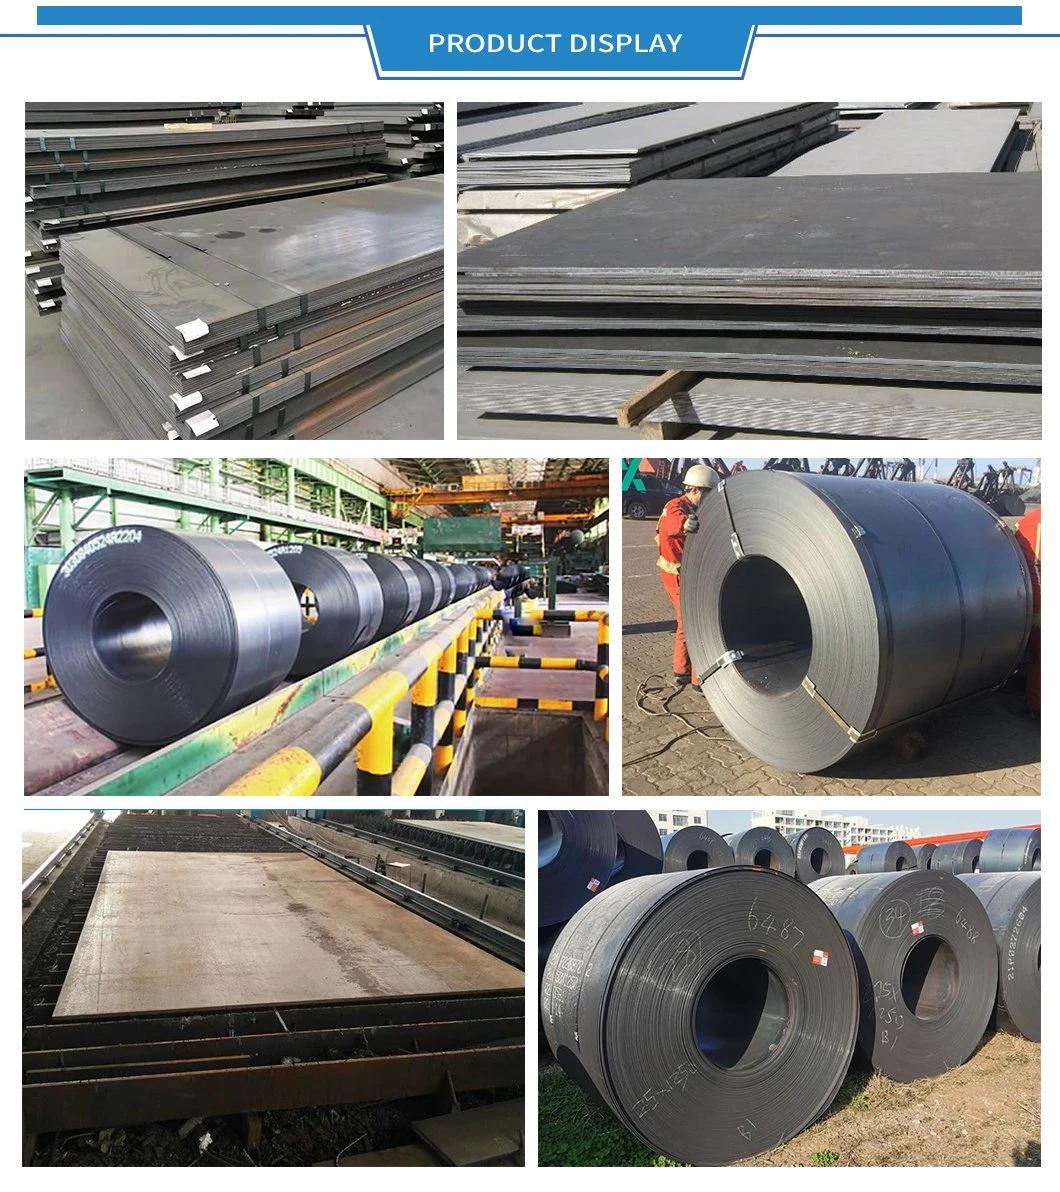 China Sheet Metal Hot Rolled Steel Sheet Coil Prices 11mm Carbon Steel Plate S235jr 1cr0.5mo 2.25cr1mo 0.5nia 0.5nib